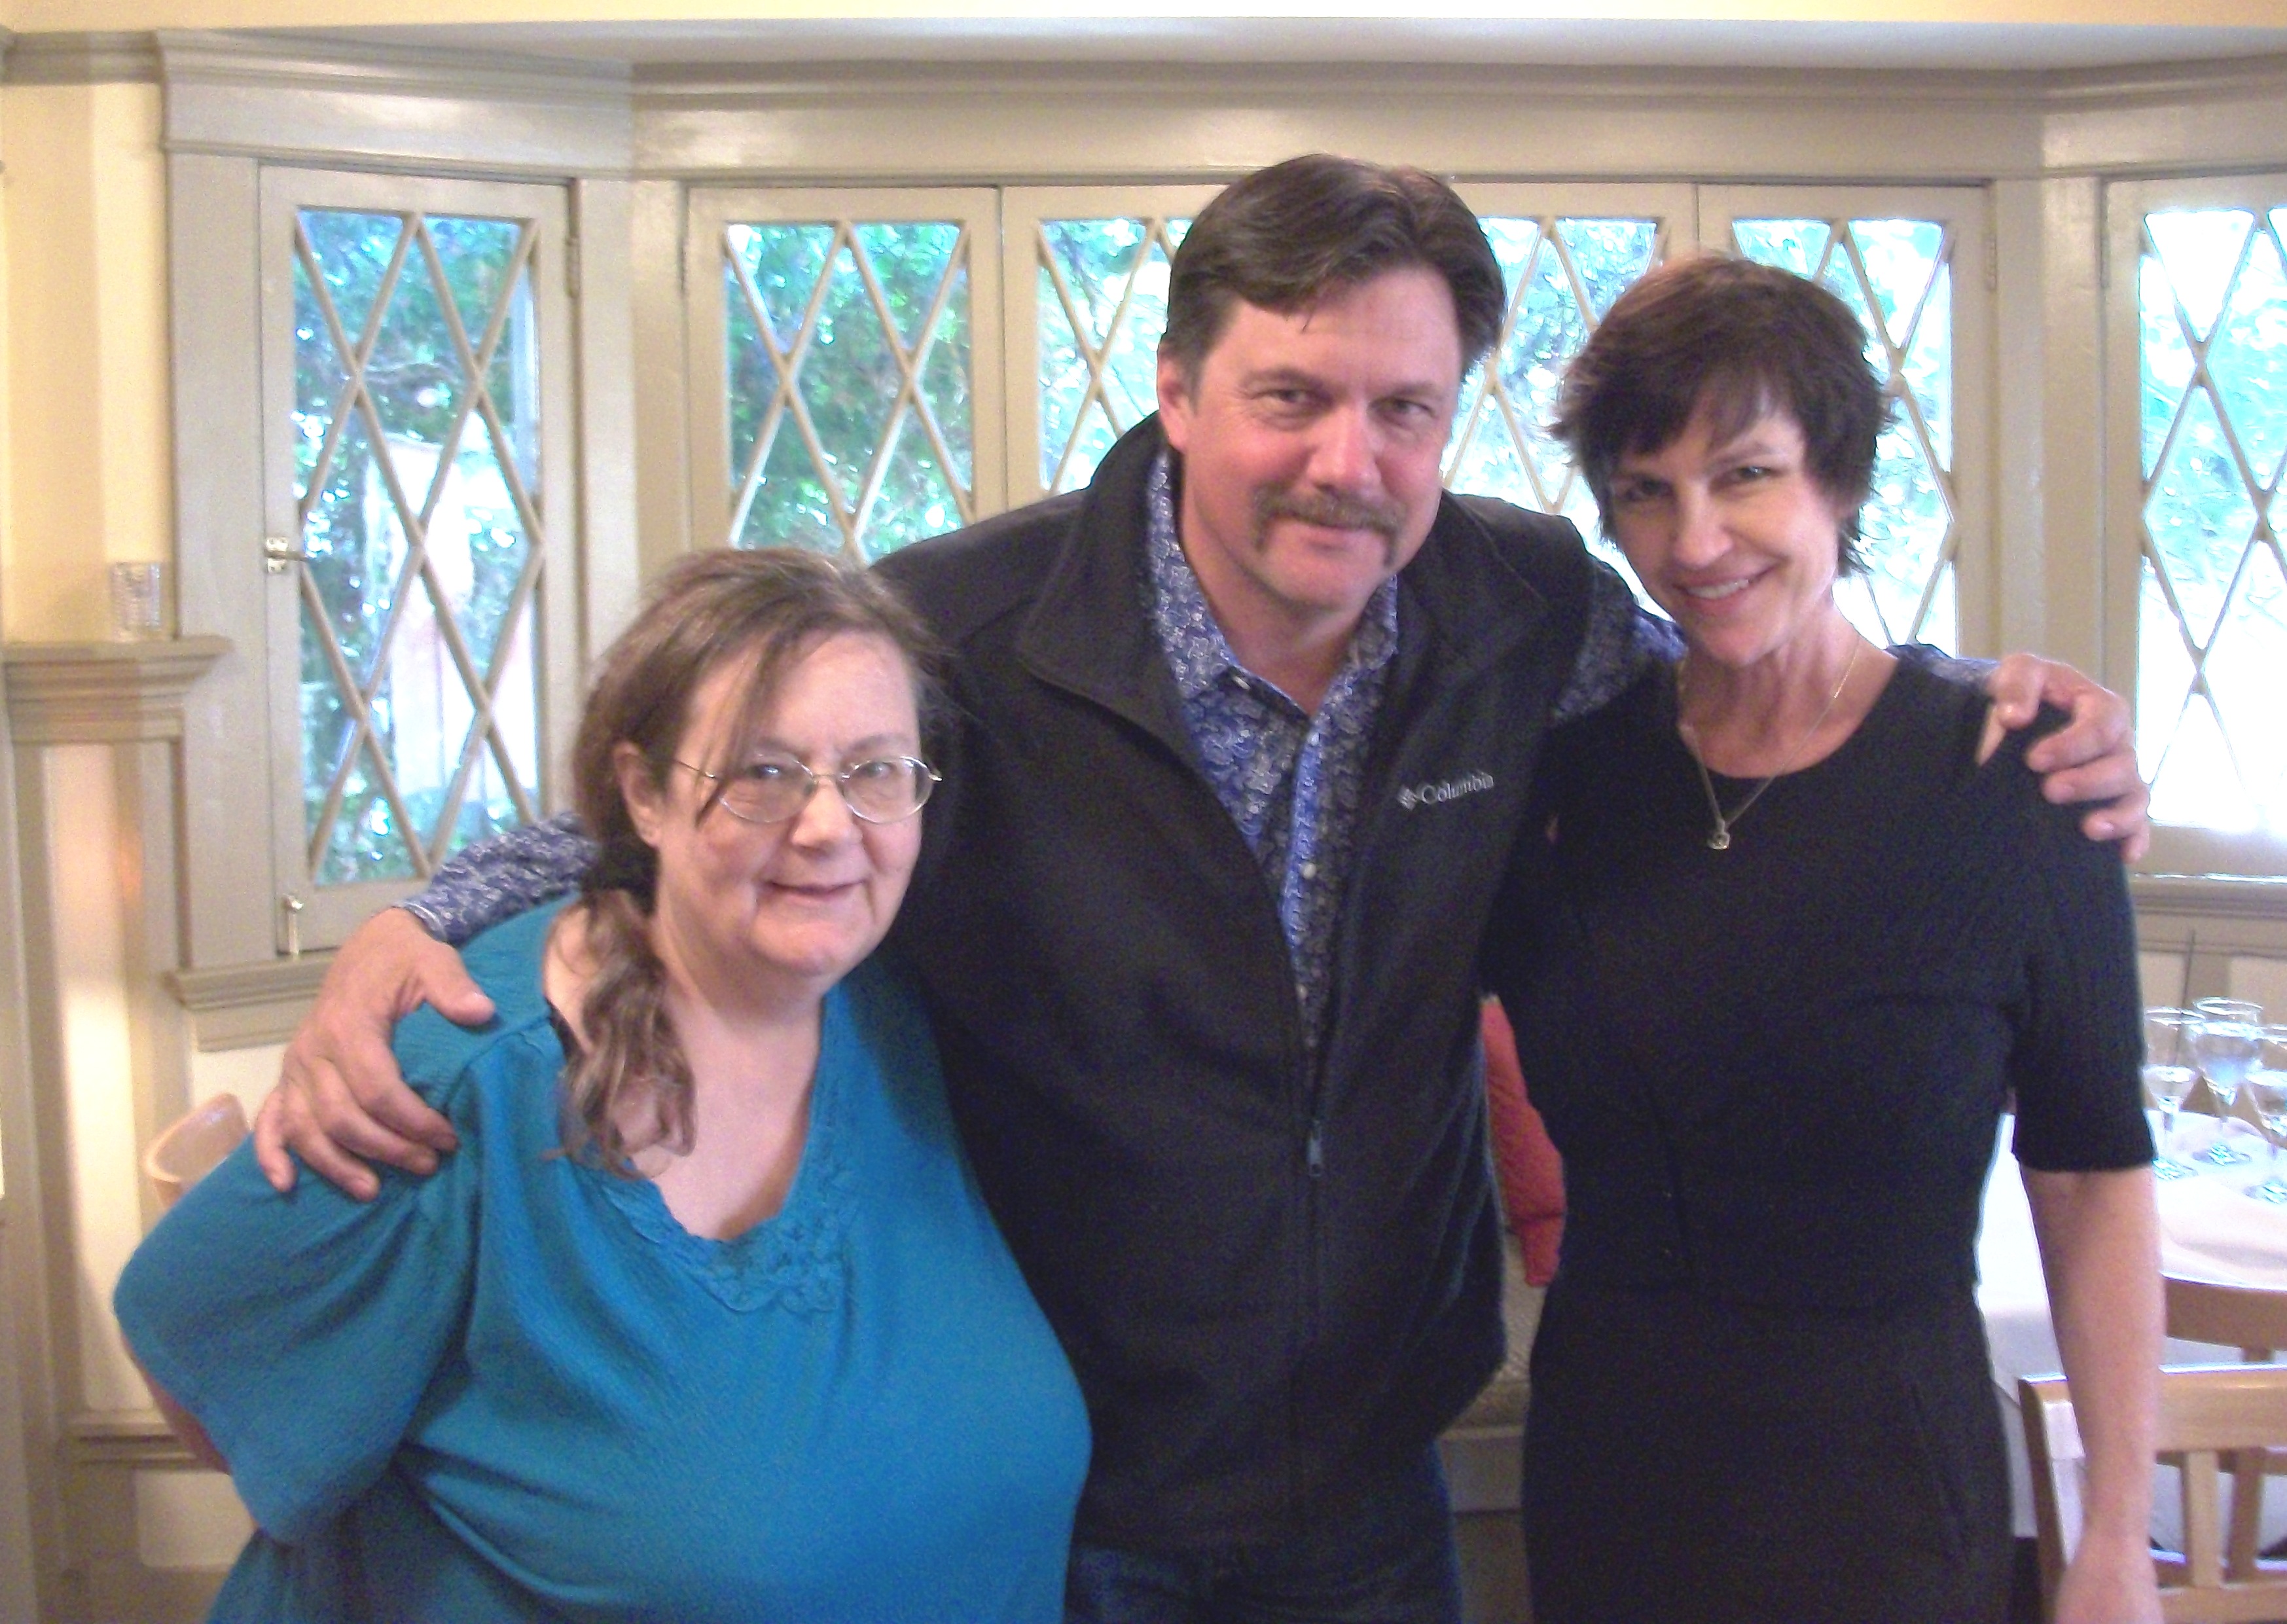 Cheryl Whitman Dubuque, Glynn Praesel and Kassi Crews. Meeting in Hollywood on several projects and post.